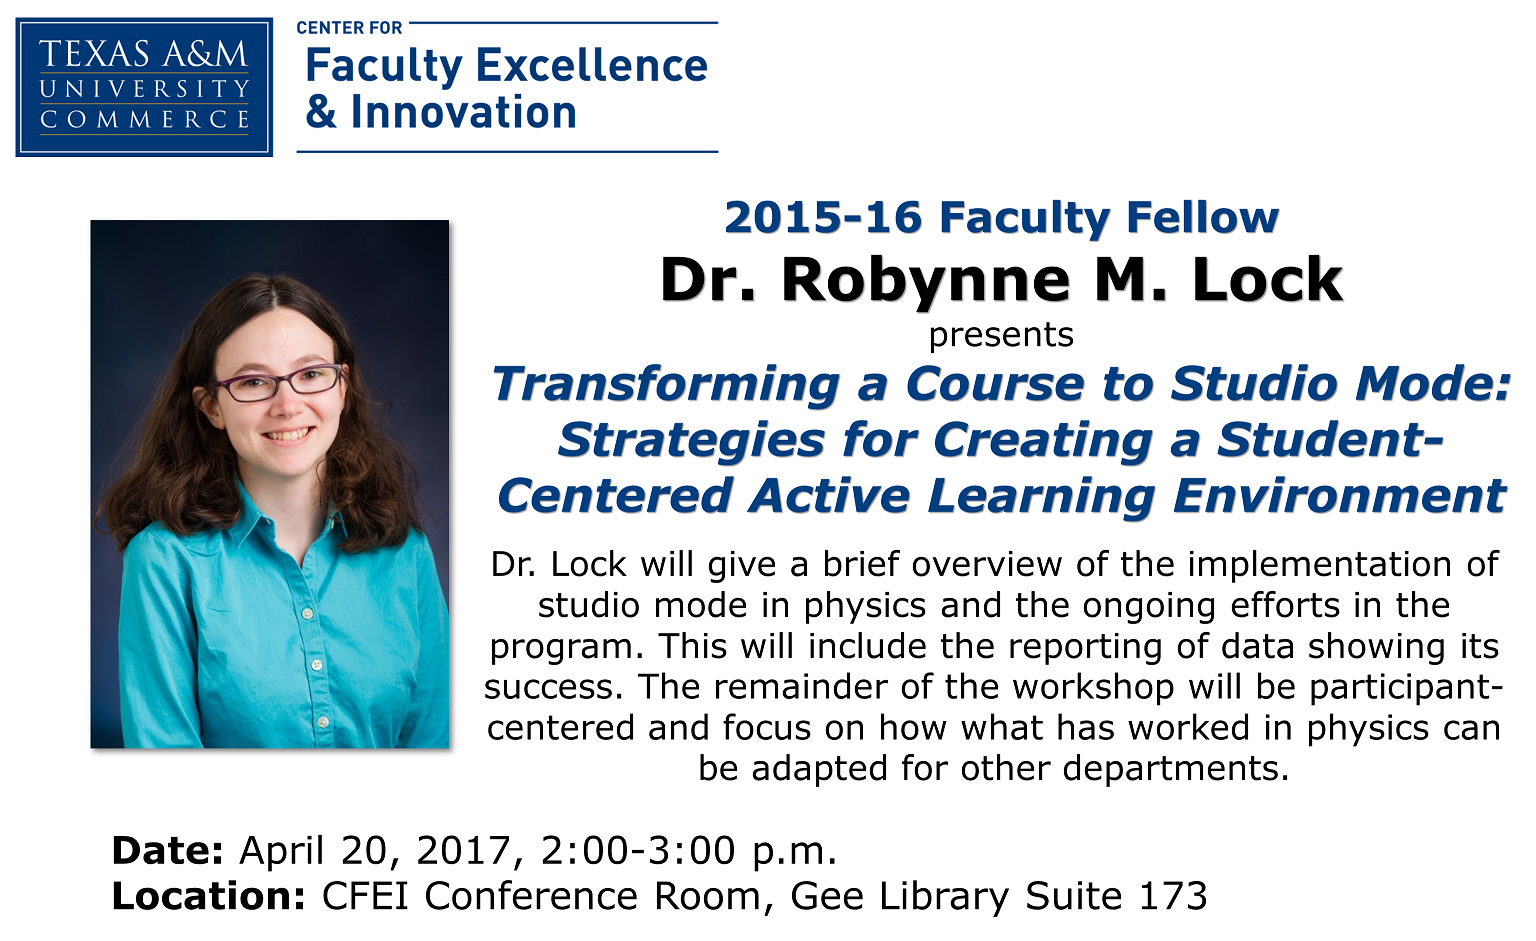 2015-16 Faculty Fellow Dr. Robynne M. Lock presents  Transforming a Course to Studio Mode: Strategies for Creating a Student-Centered Active Learning Environment. Dr. Lock will give a brief overview of the implementation of studio mode in physics and the ongoing efforts in the program. This will include the reporting of data showing its success. The remainder of the workshop will be participant-centered and focus on how what has worked in physics can be adapted for other departments.  Date: April 20, 2017, 2:00-3:00 p.m.Location: CFEI Conference Room, Gee Library Suite 173